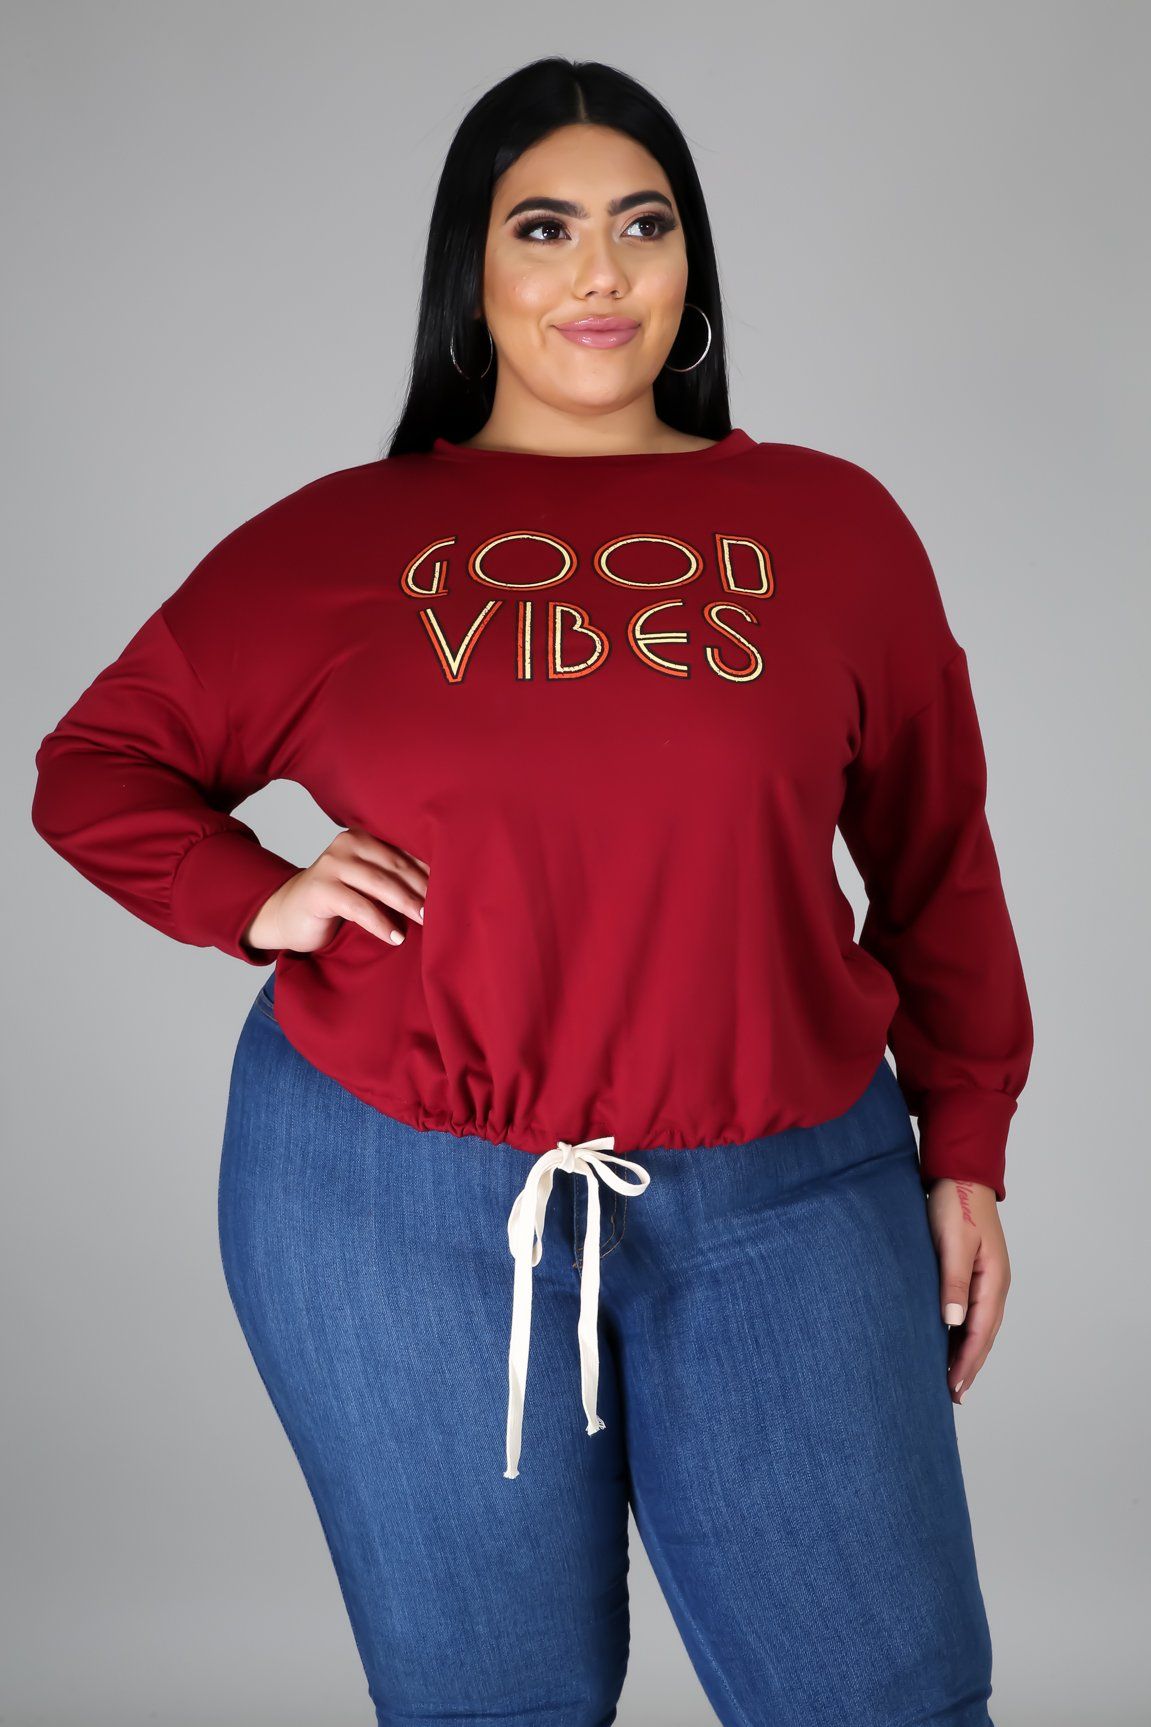 Everyday Vibes Top